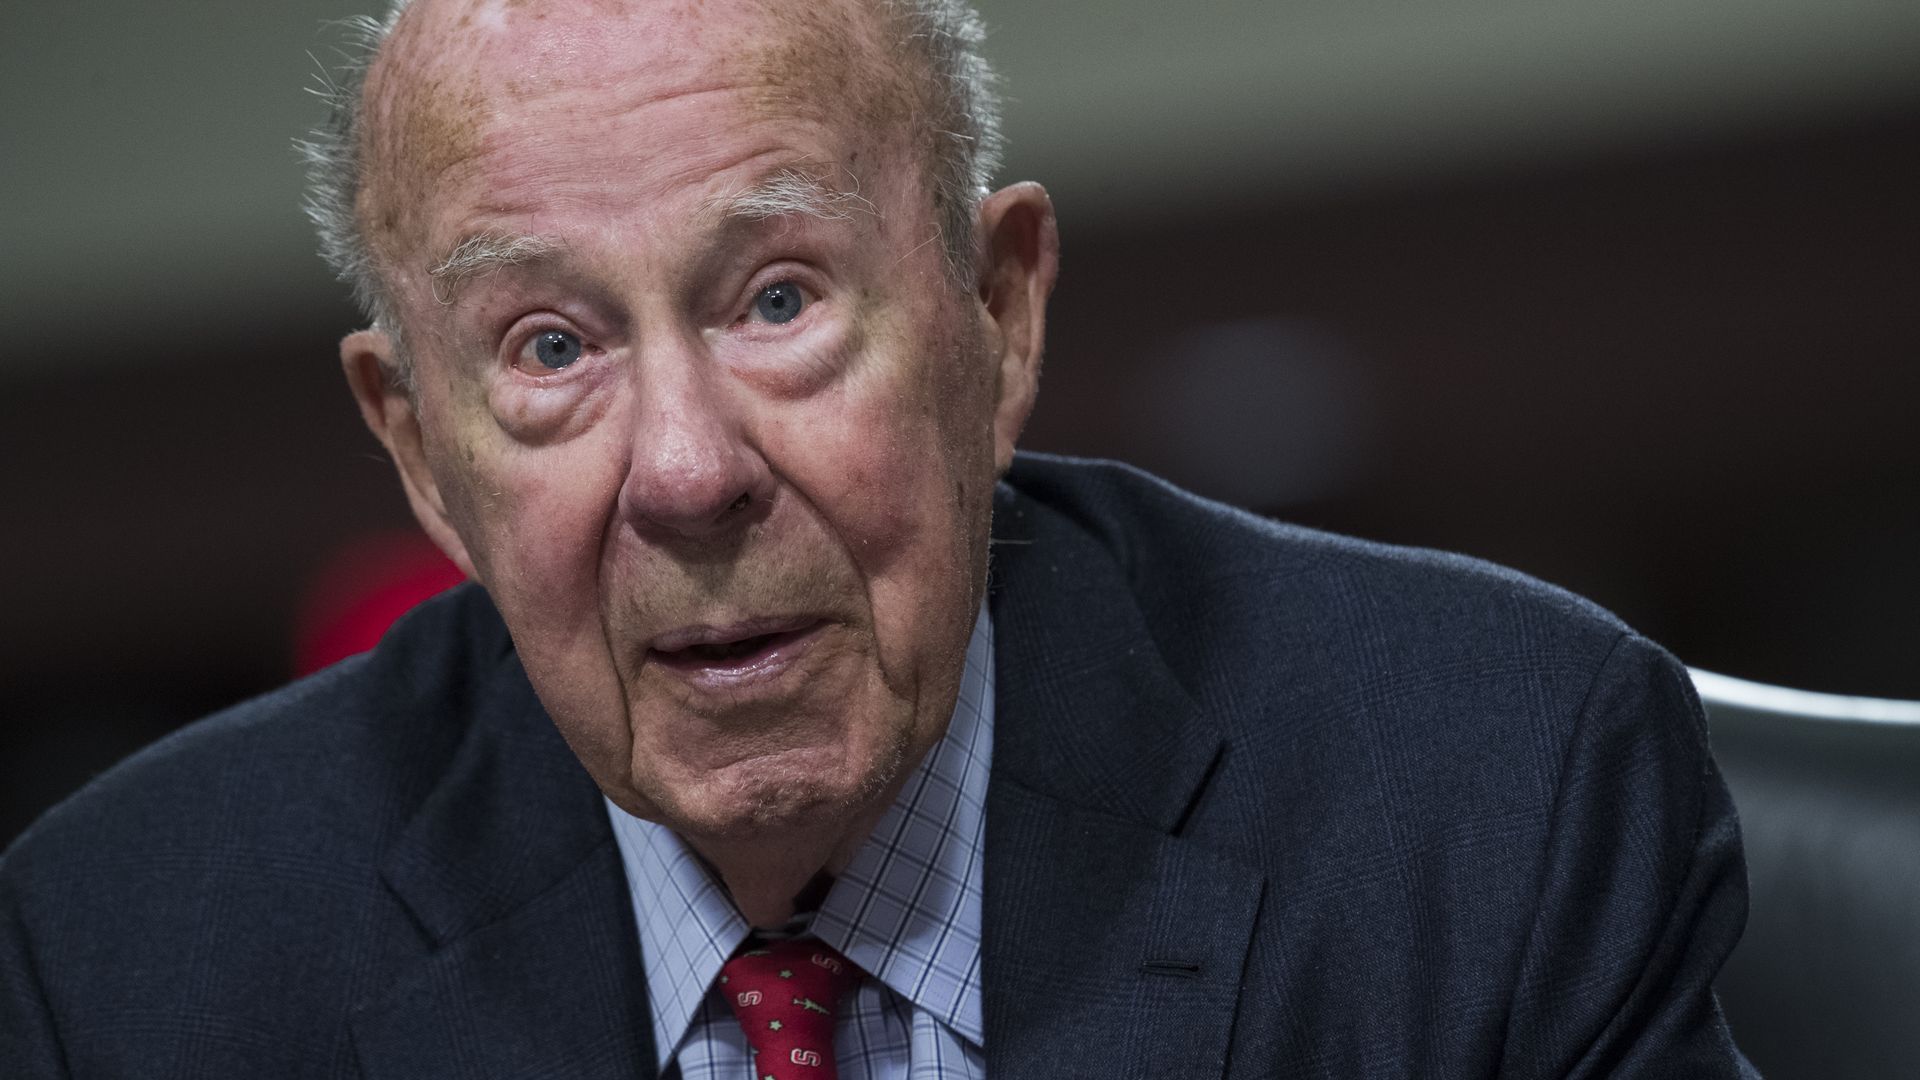 George Shultz in a red tie and a suit